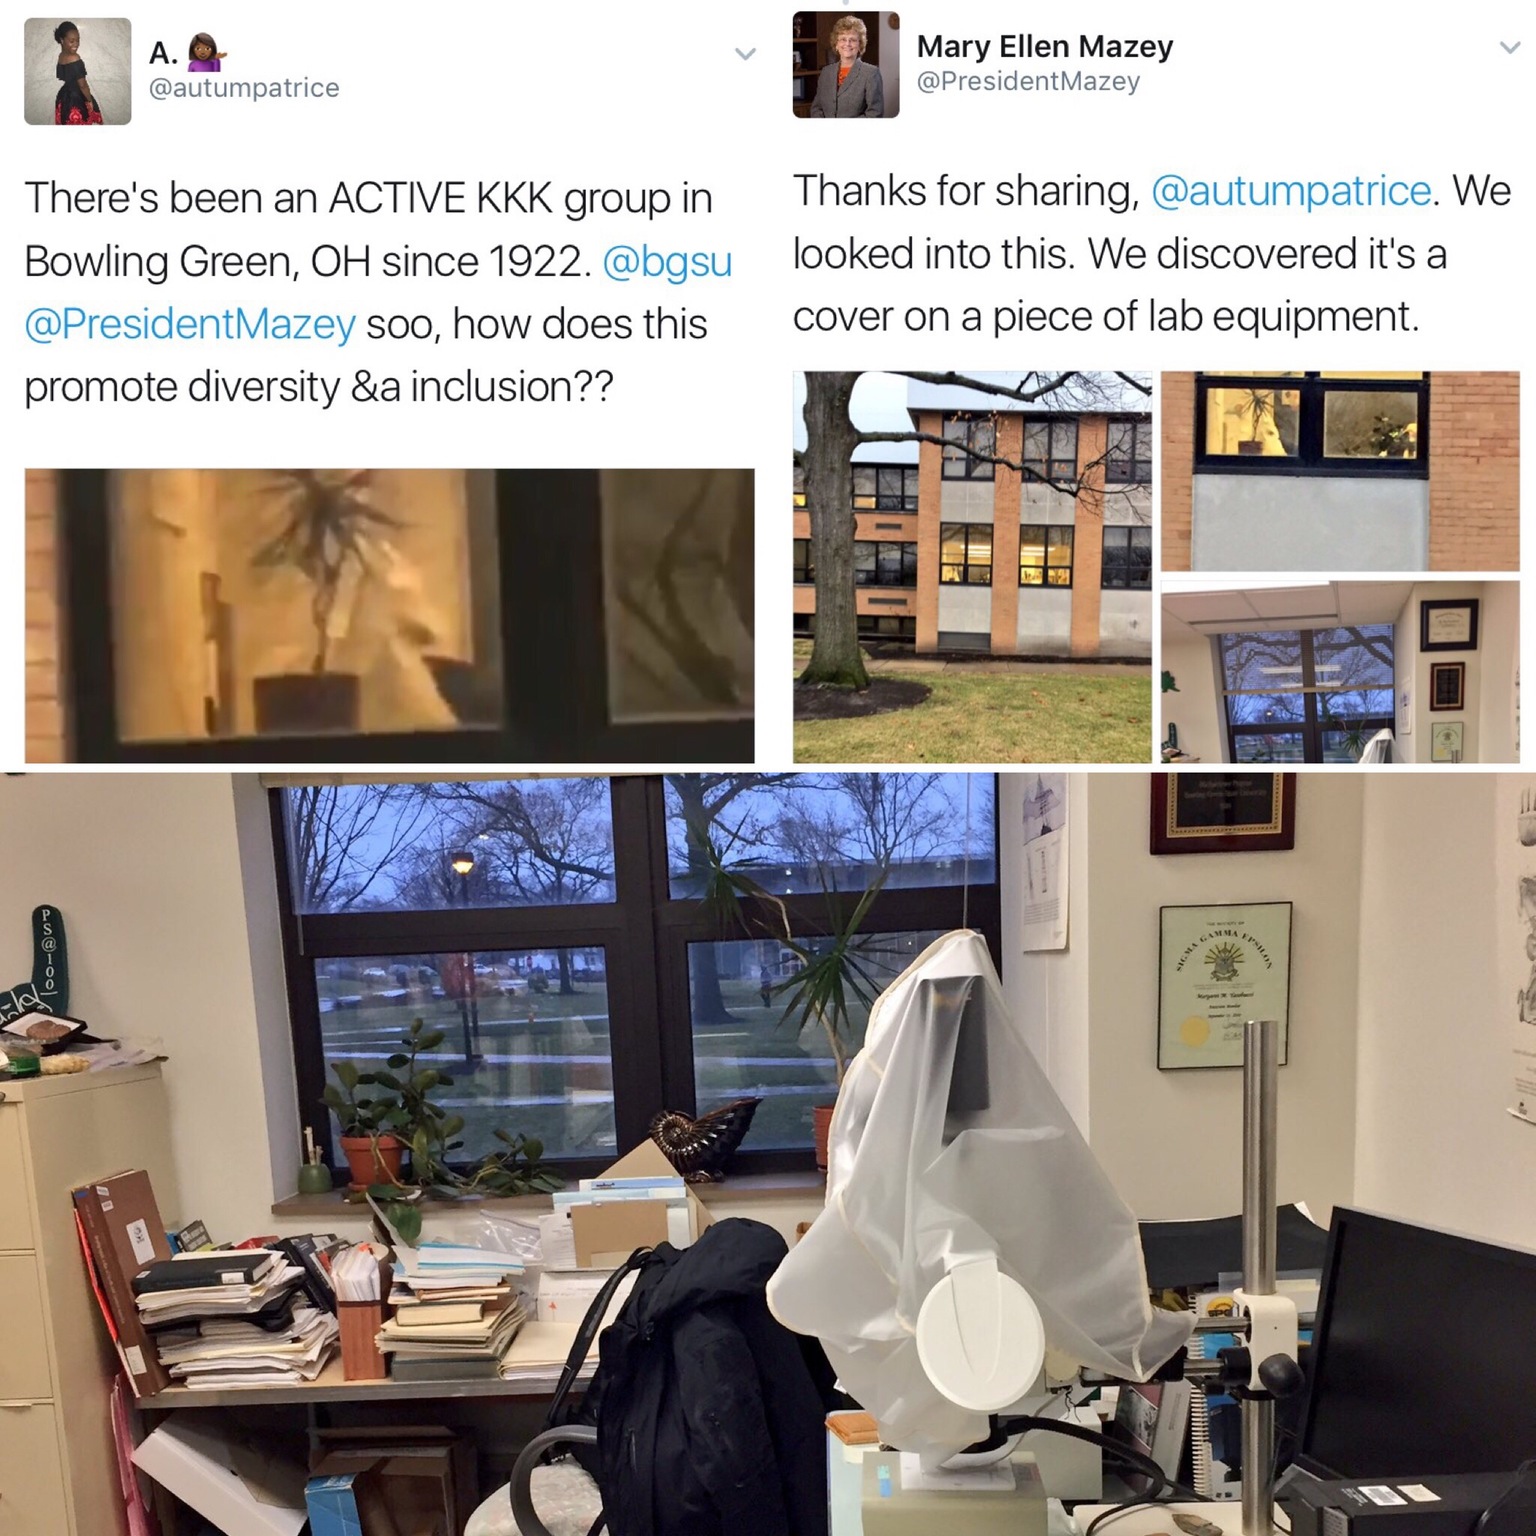 kkk lab equipment covering - Mary Ellen Mazey President Mazey fautumpatrice There's been an Active Kkk group in Bowling Green, Oh since 1922. Mazey soo, how does this promote diversity &a inclusion?? Thanks for sharing, . We looked into this. We discovere